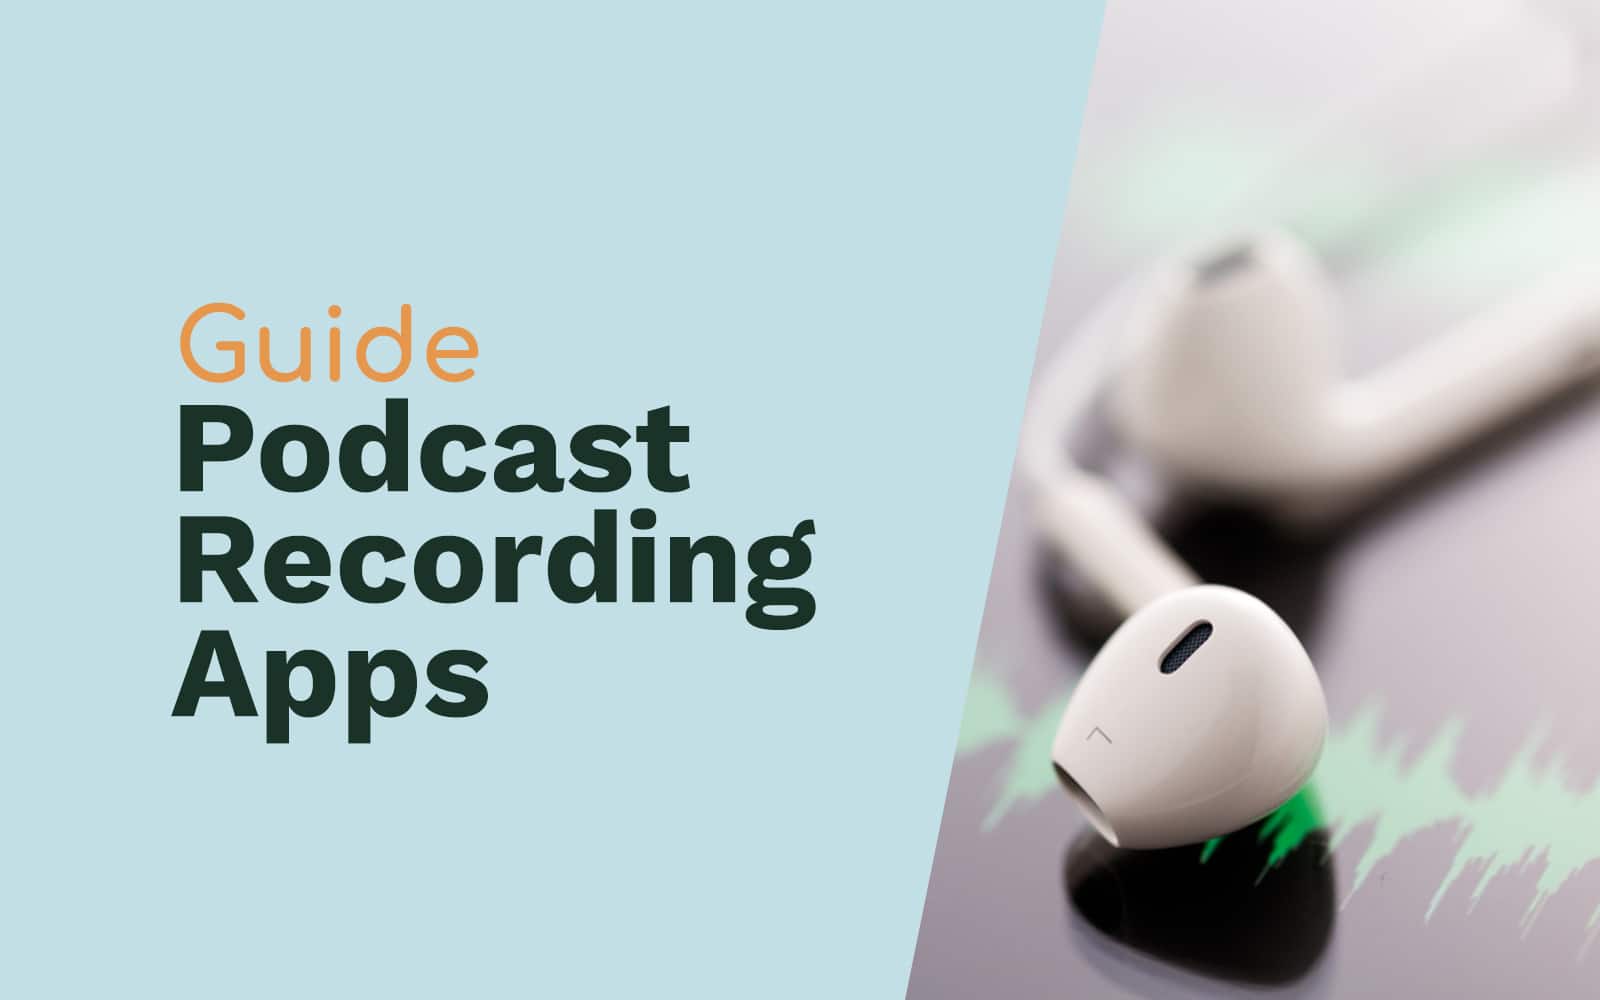 Podcast Apps: The Best Podcast Recording Apps for iOS and Android General podcast apps Music Radio Creative